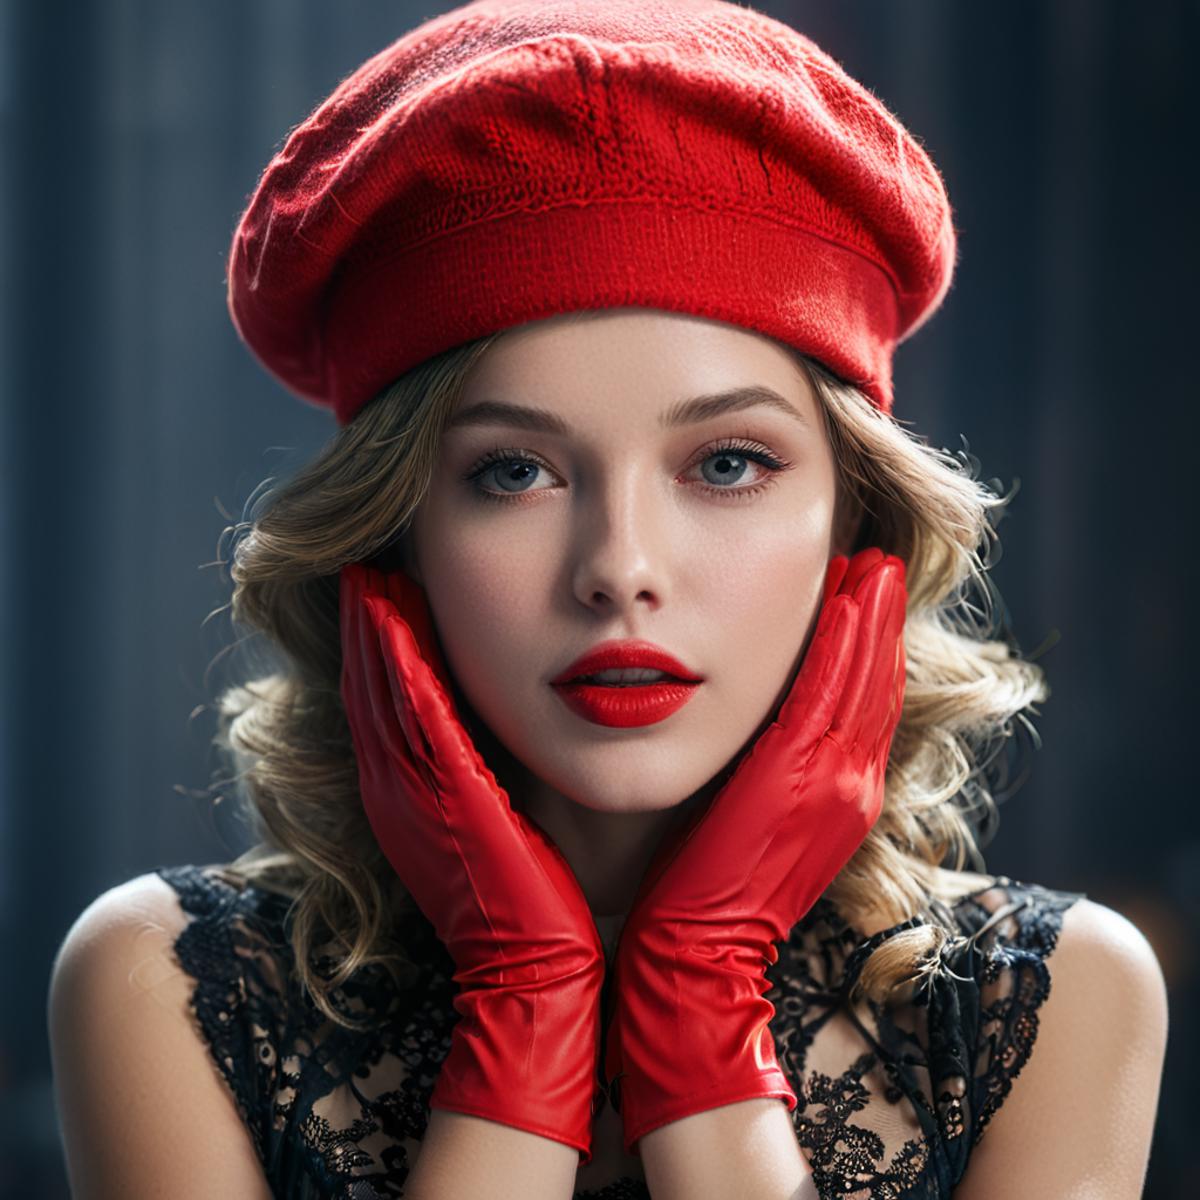 mid shot,lingerie,a woman wearing red gloves and a red hat with her hands on her face and a red hat on her head, Elina Kar...